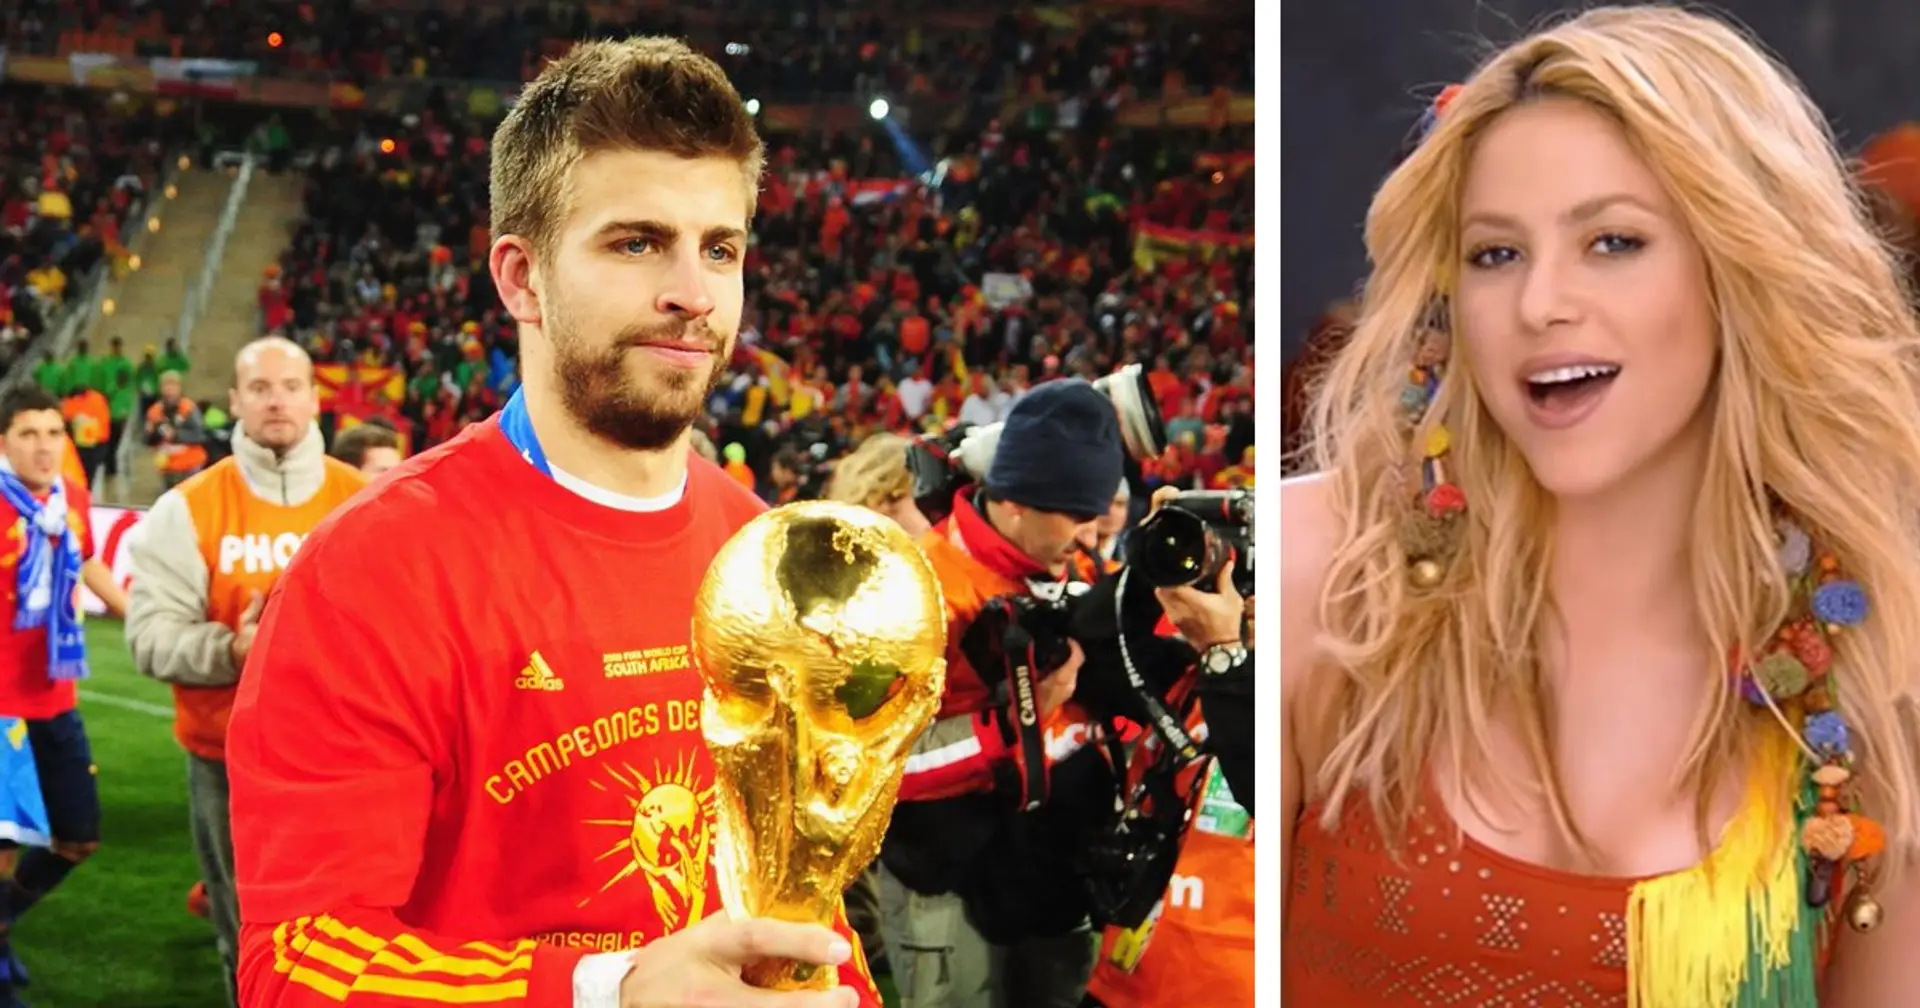 Gerard Pique reveals Shakira's text message about weather that made him fall in love with her